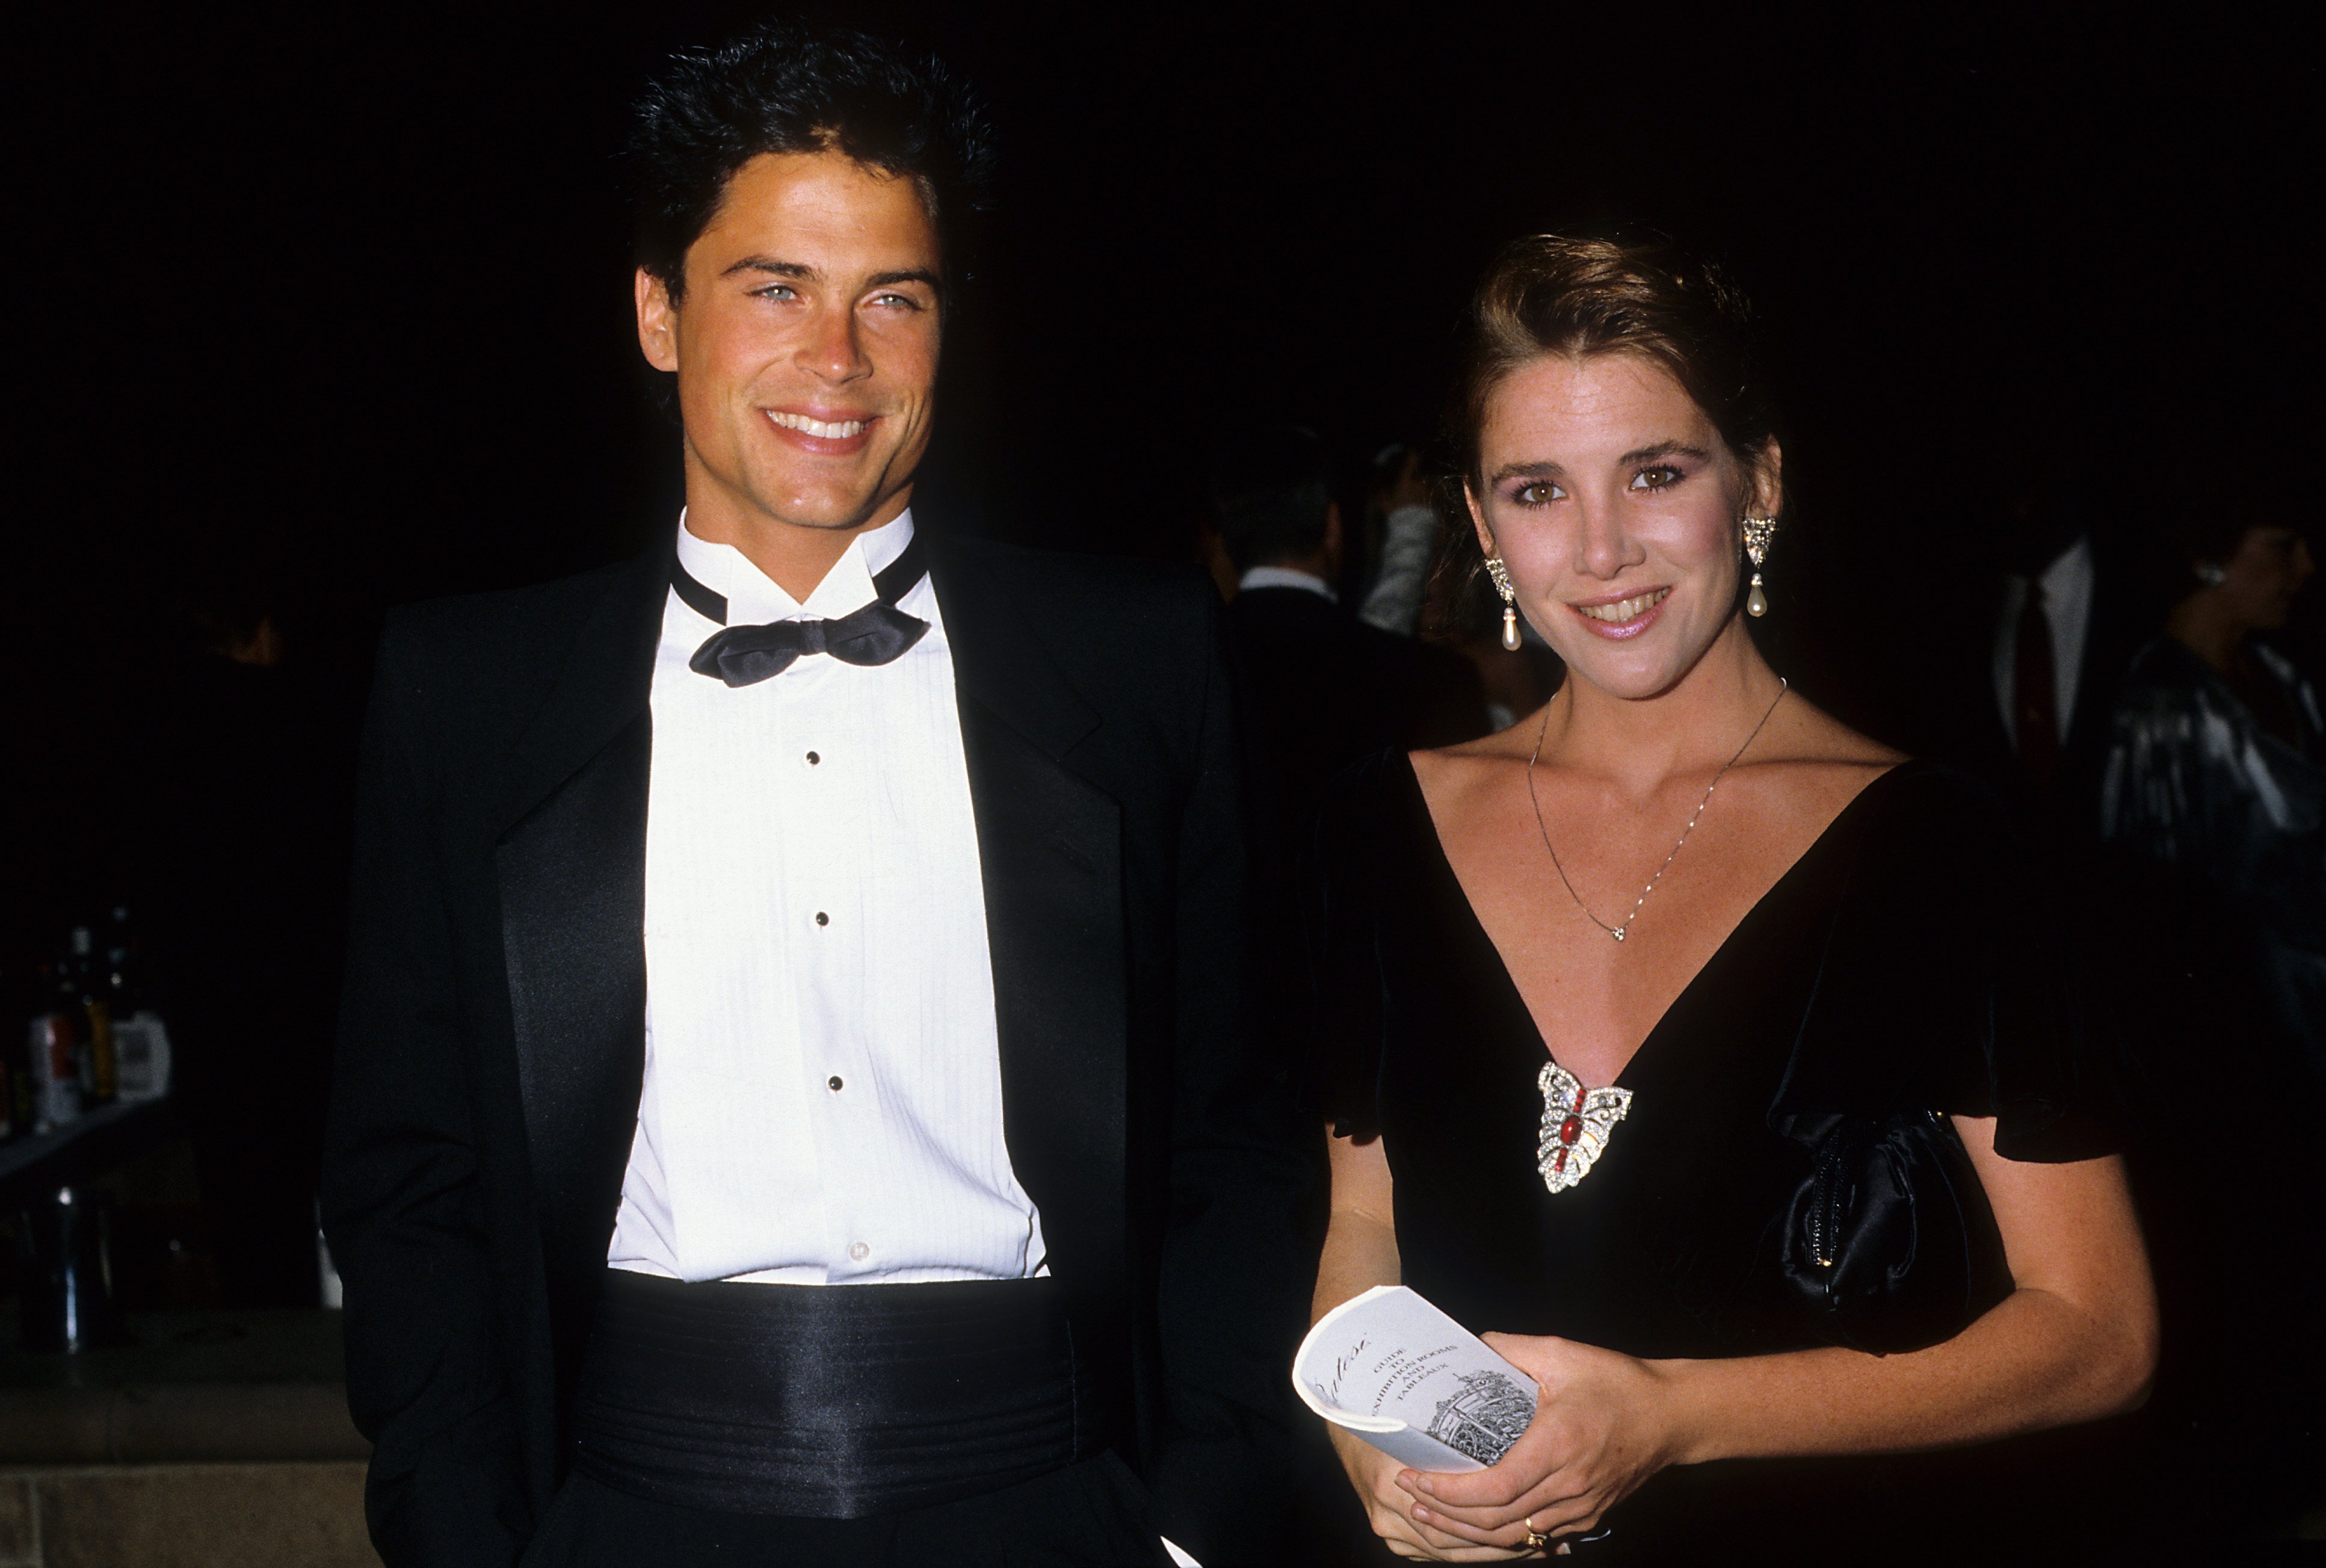 Rob Lowe and Melissa Gilbert pose together at event 1987